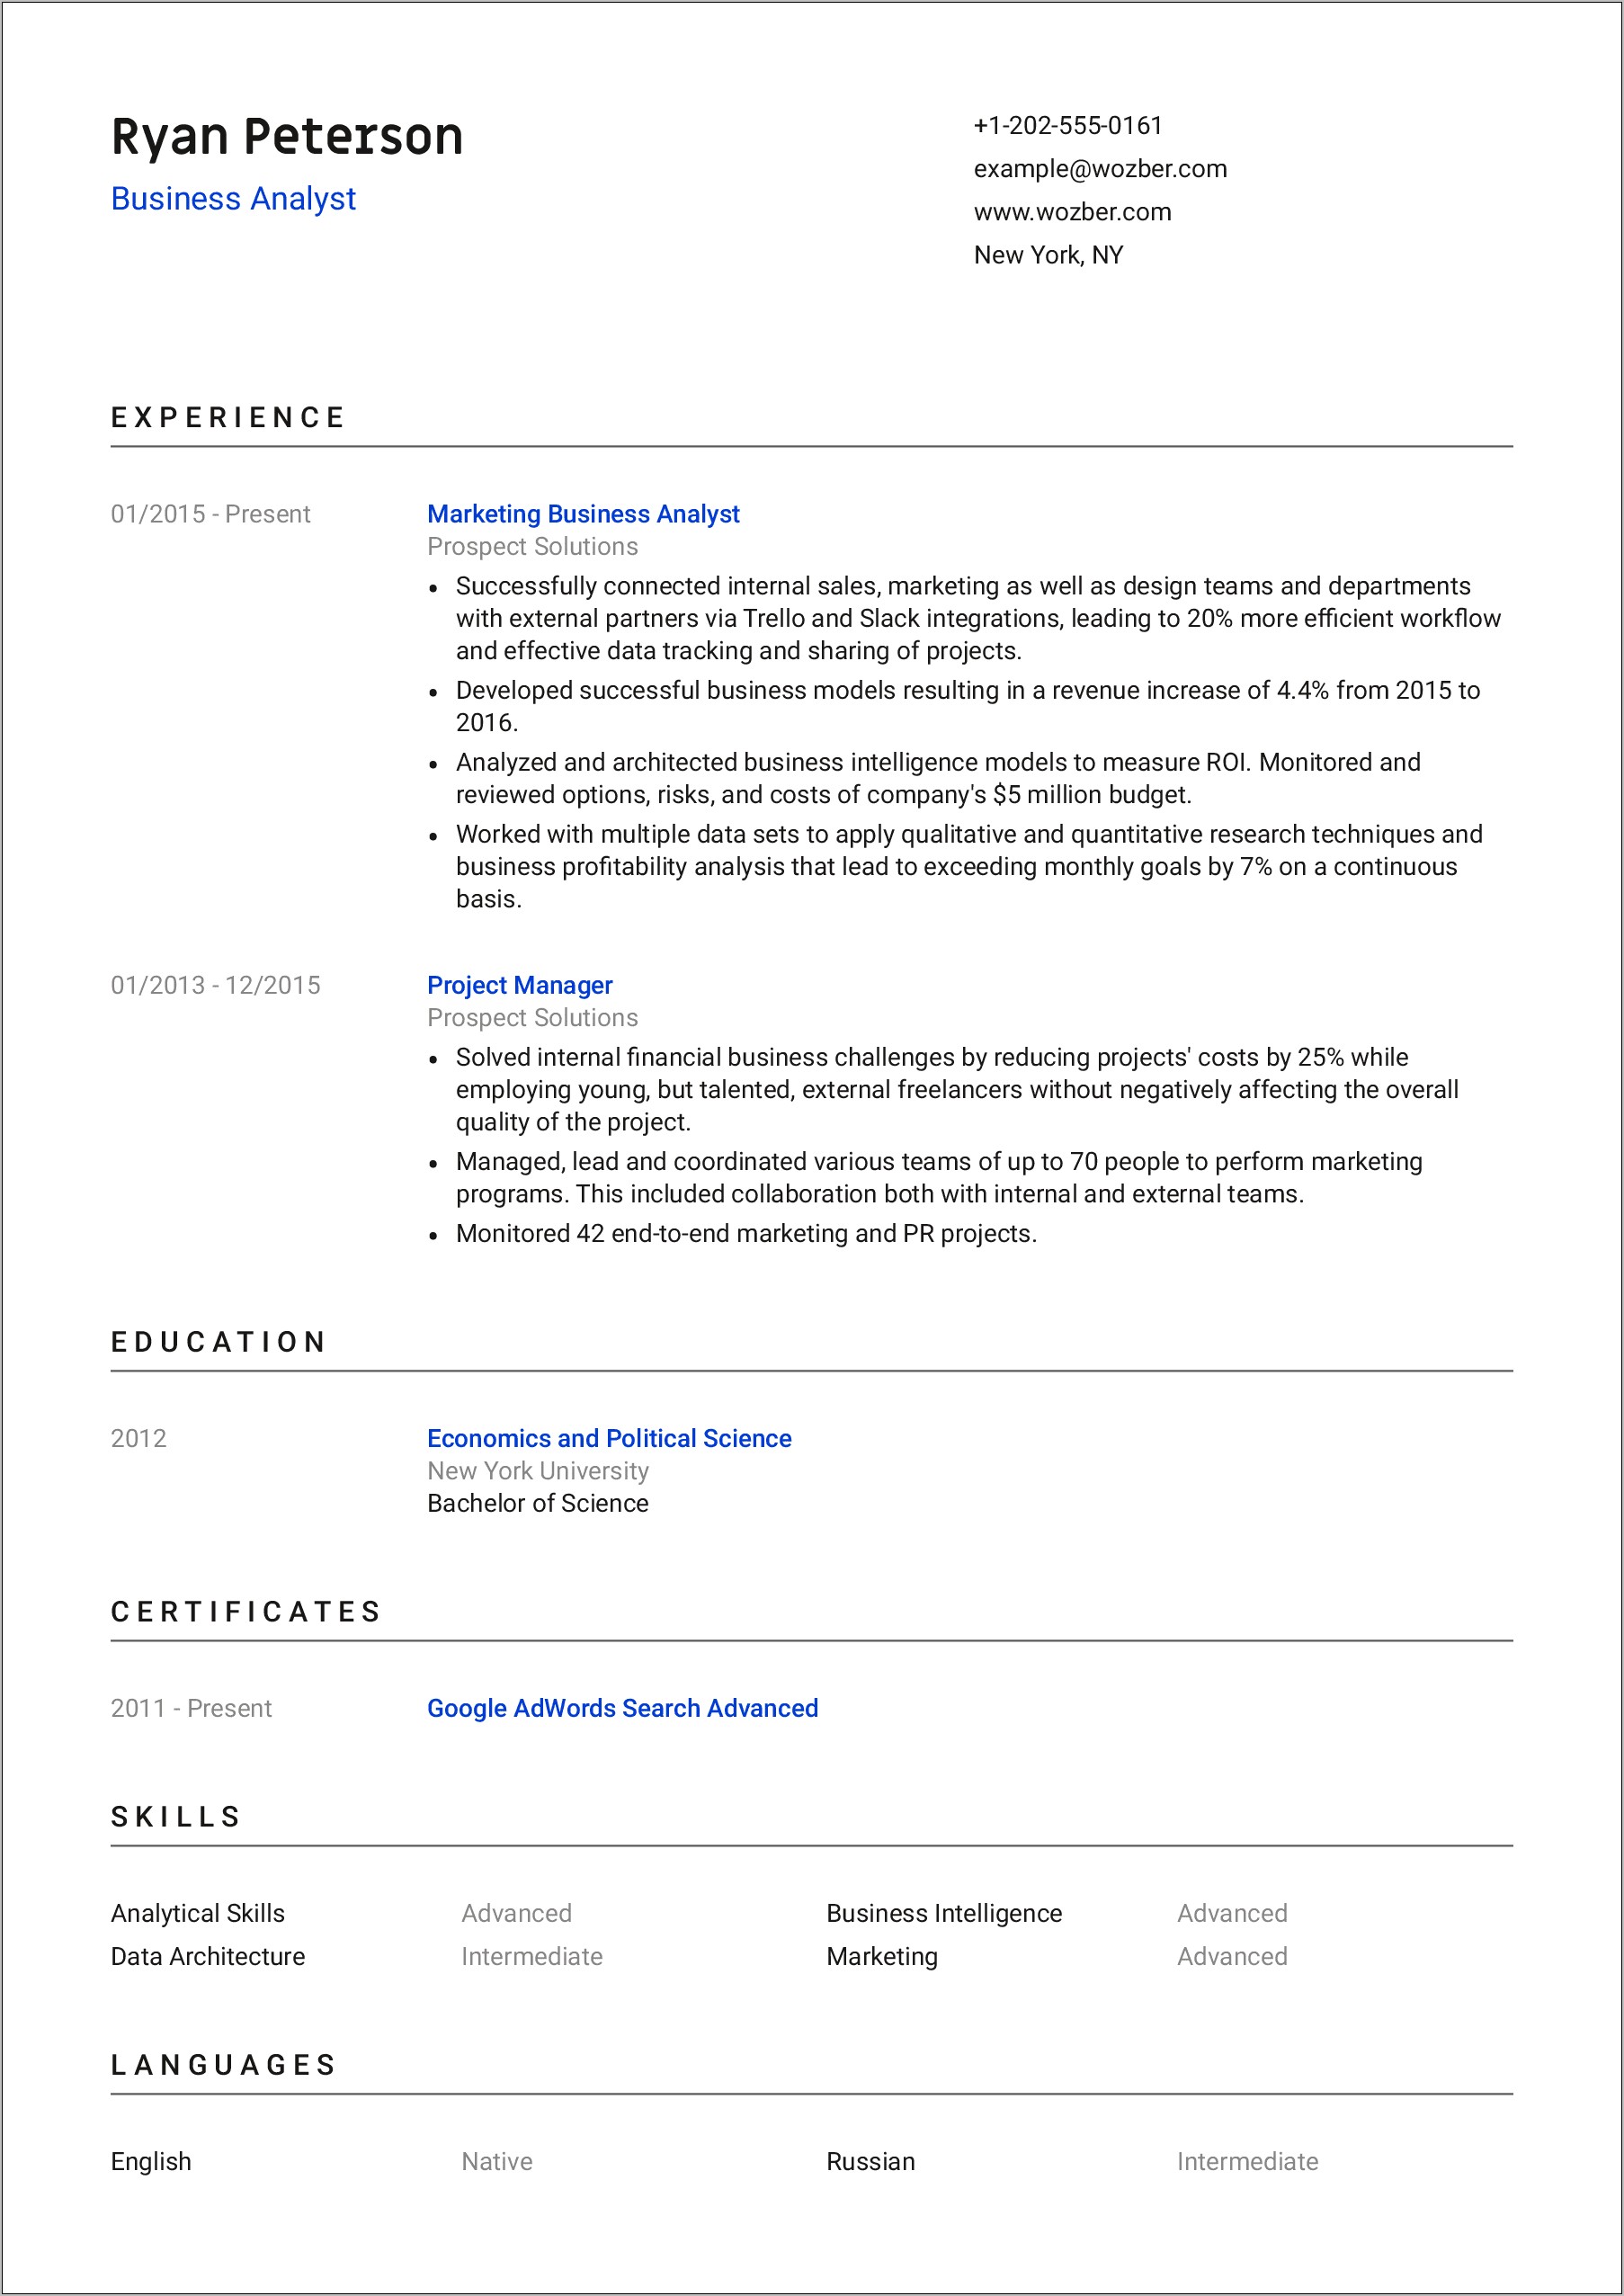 Resume Example For An Analyst Job